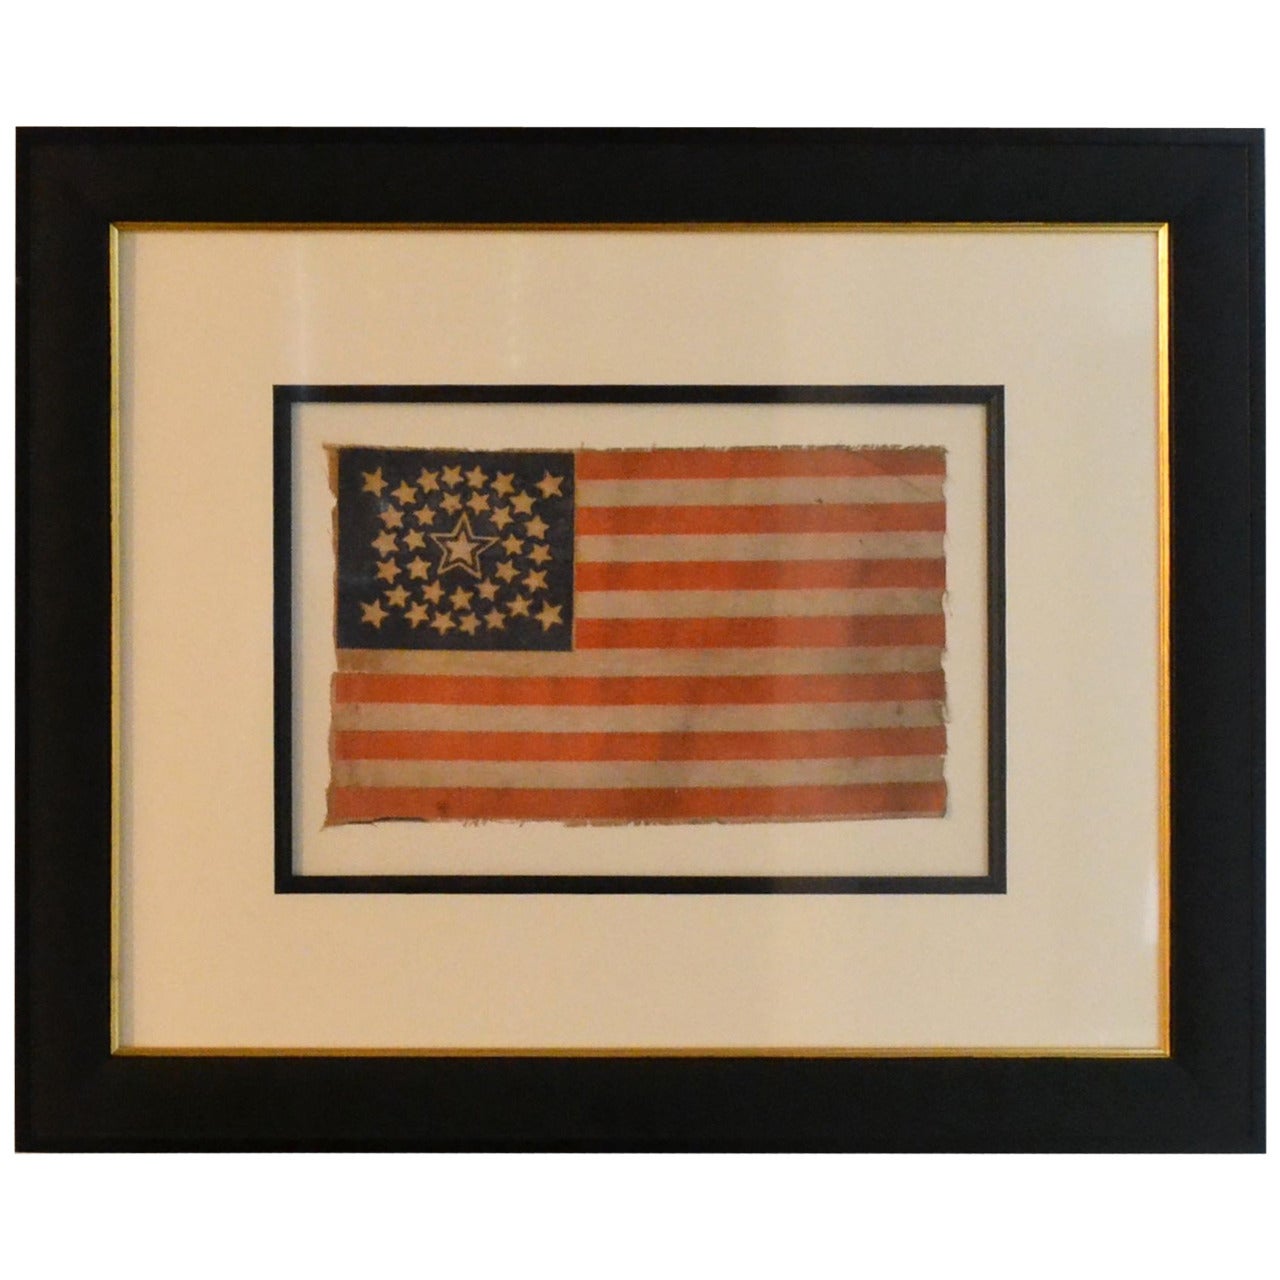 34-Star Civil War Flag with “Halo” Star Pattern For Sale